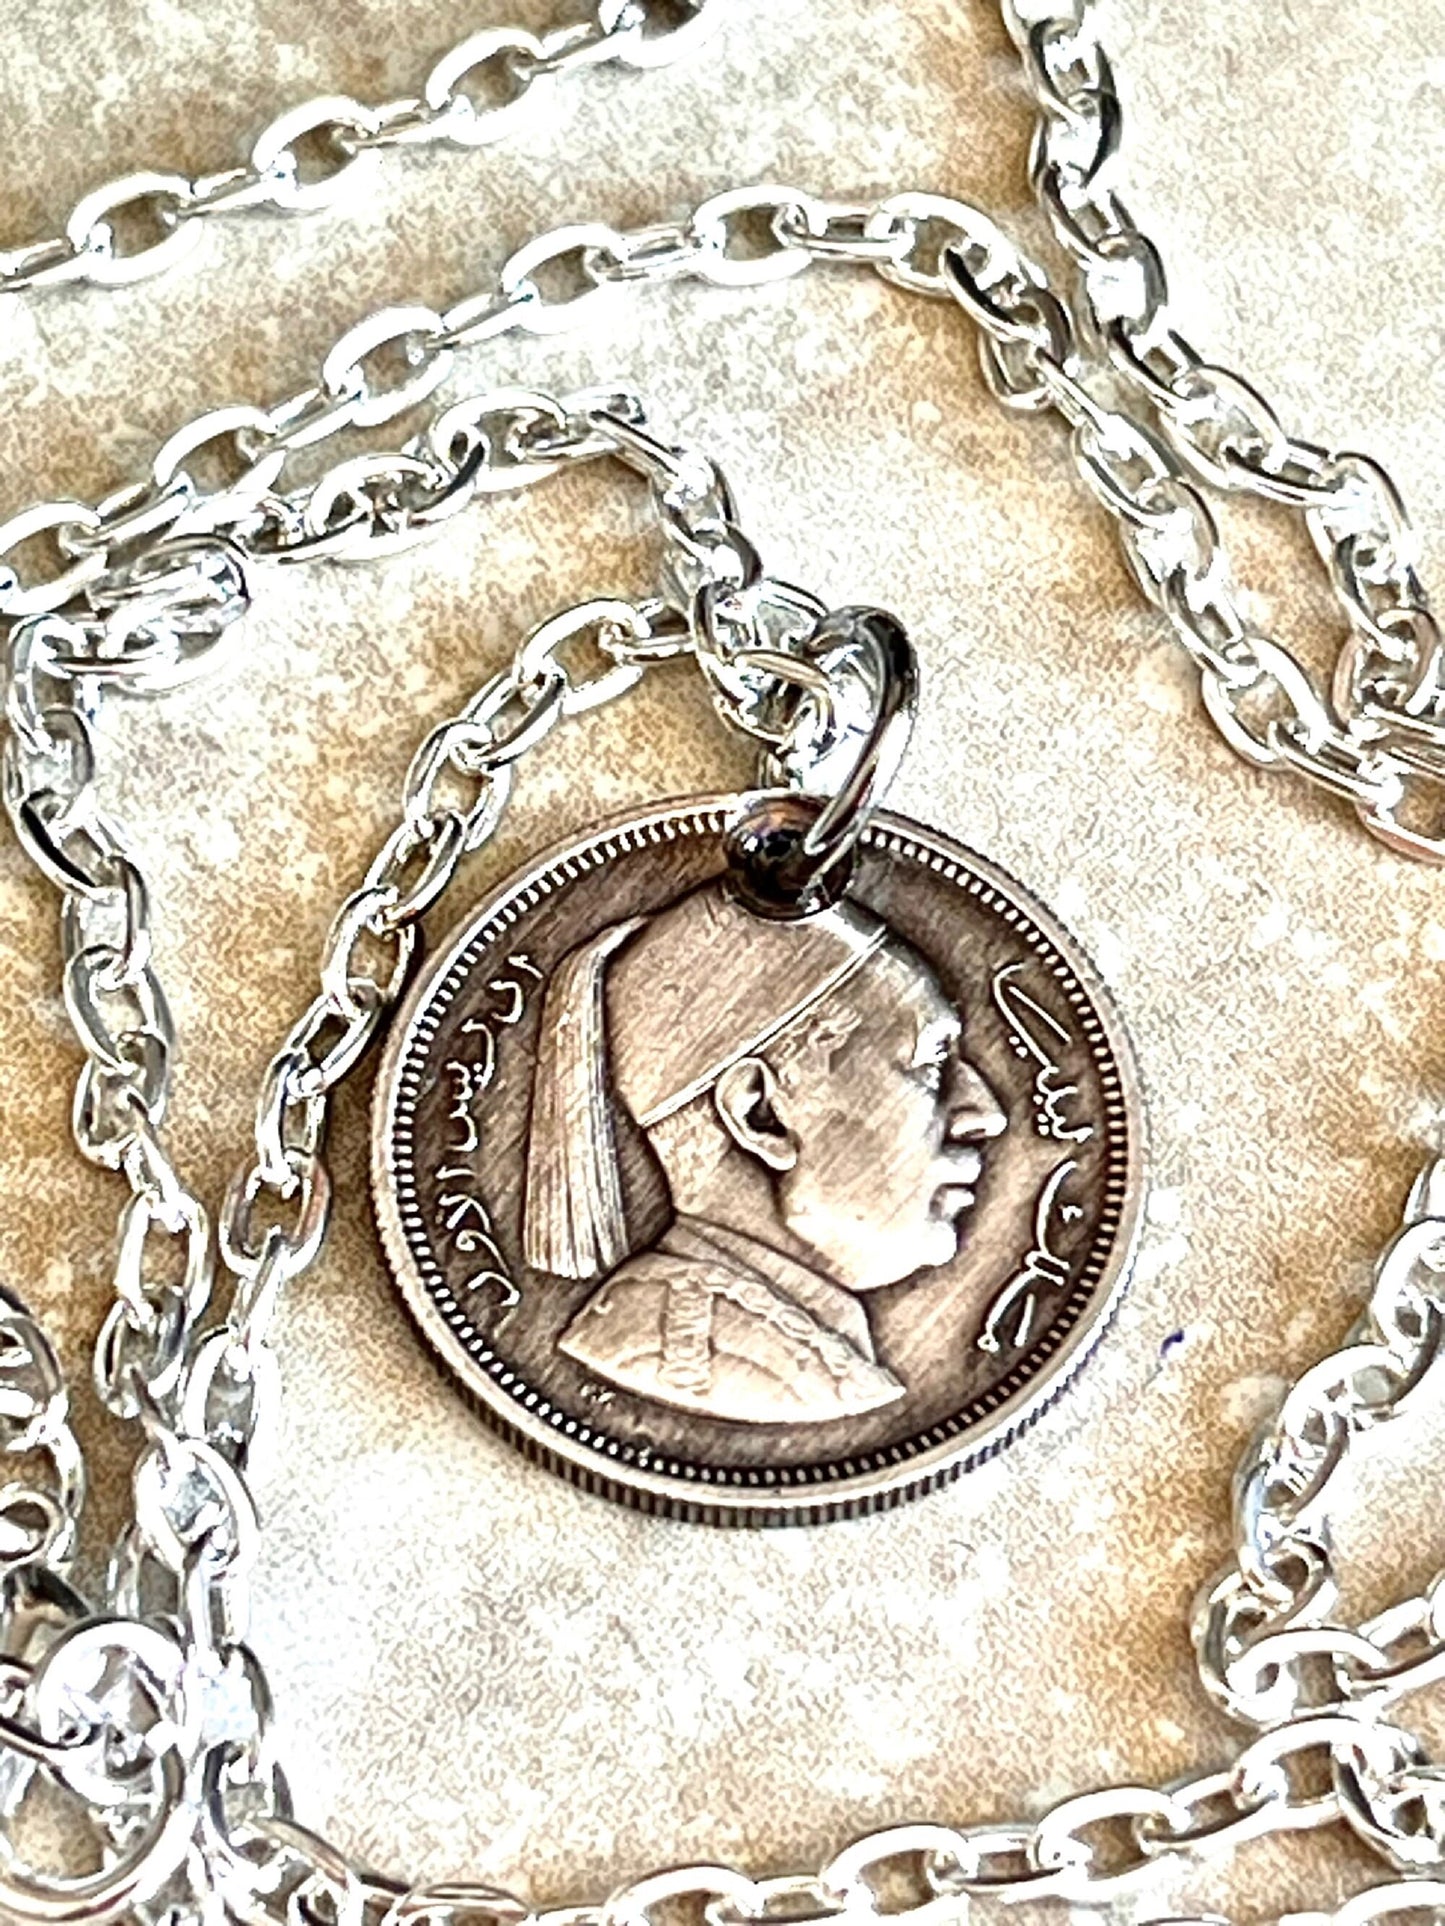 Libya Coin Pendant Libyan 1 Piastres Personal Necklace Old Vintage Handmade Jewelry Gift Friend Charm For Him Her World Coin Collector